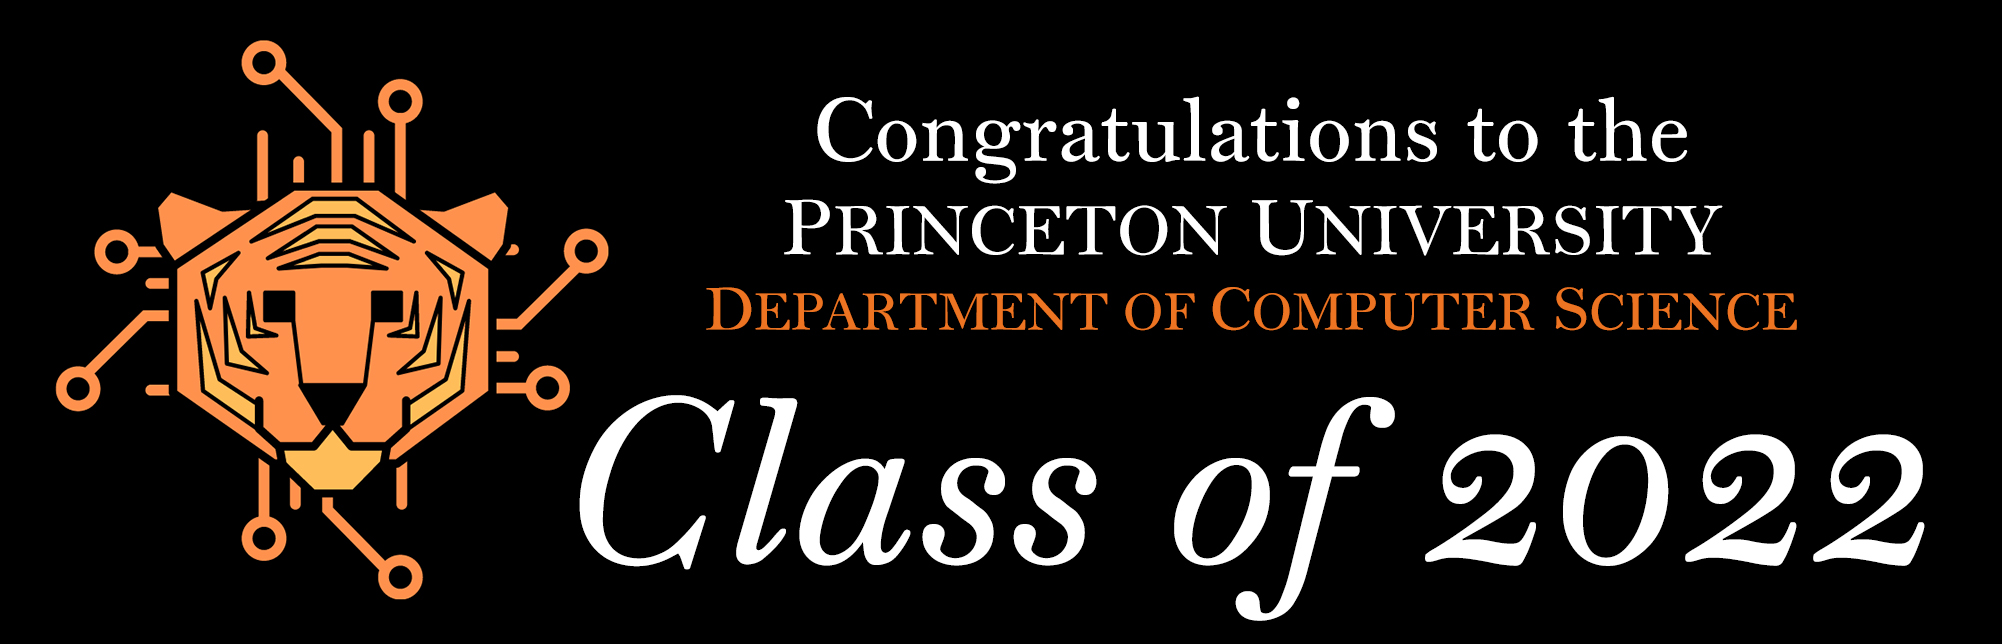 White and orange text over black.  Text reads Congratulations to the Princeton University Department of Computer Science Class of 2022.  Includes an orange illustration of a tiger head.